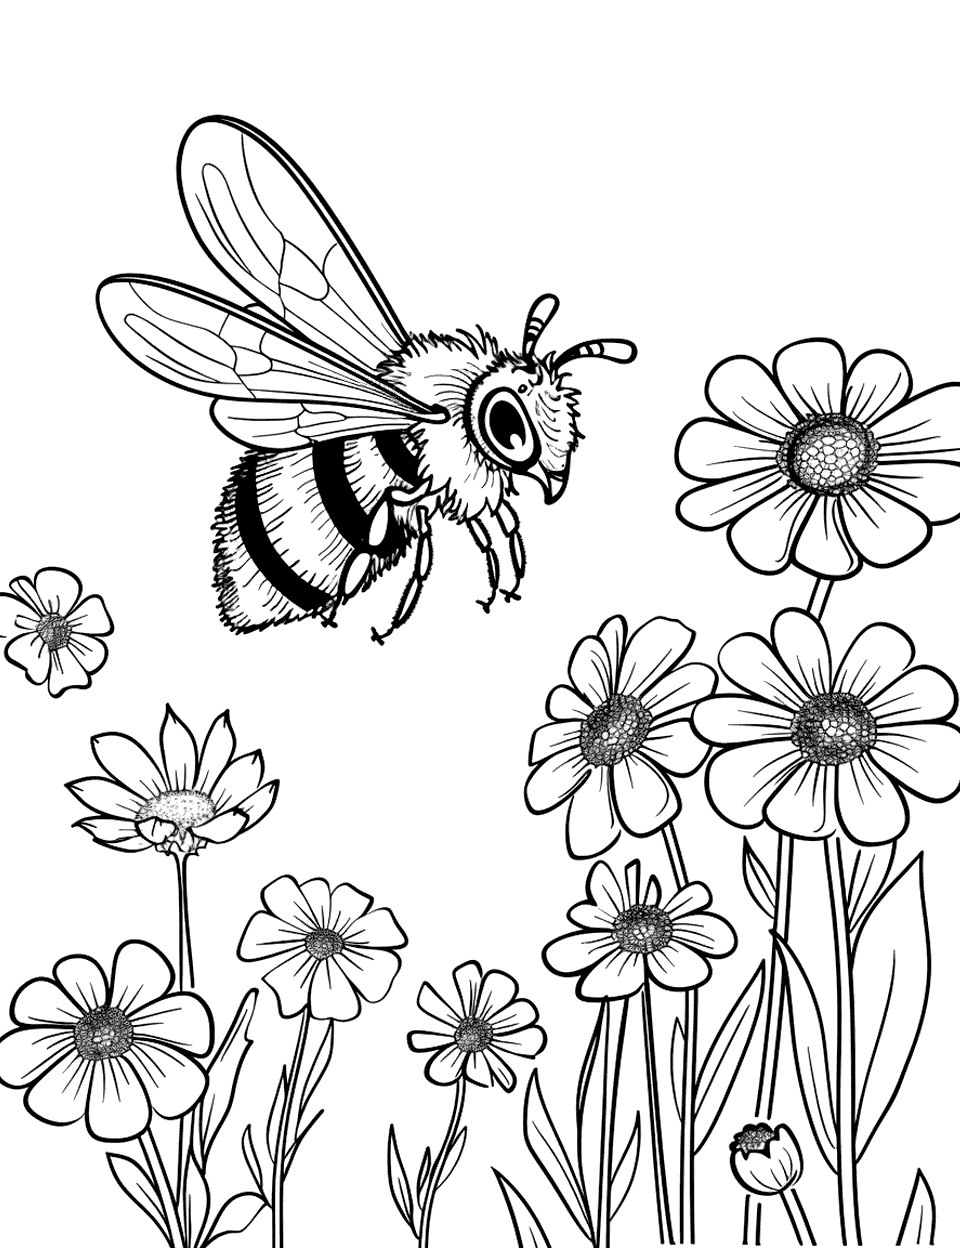 Bee in a Field of Wildflowers Coloring Page - A realistic depiction of a bee flying low over a field of wildflowers.